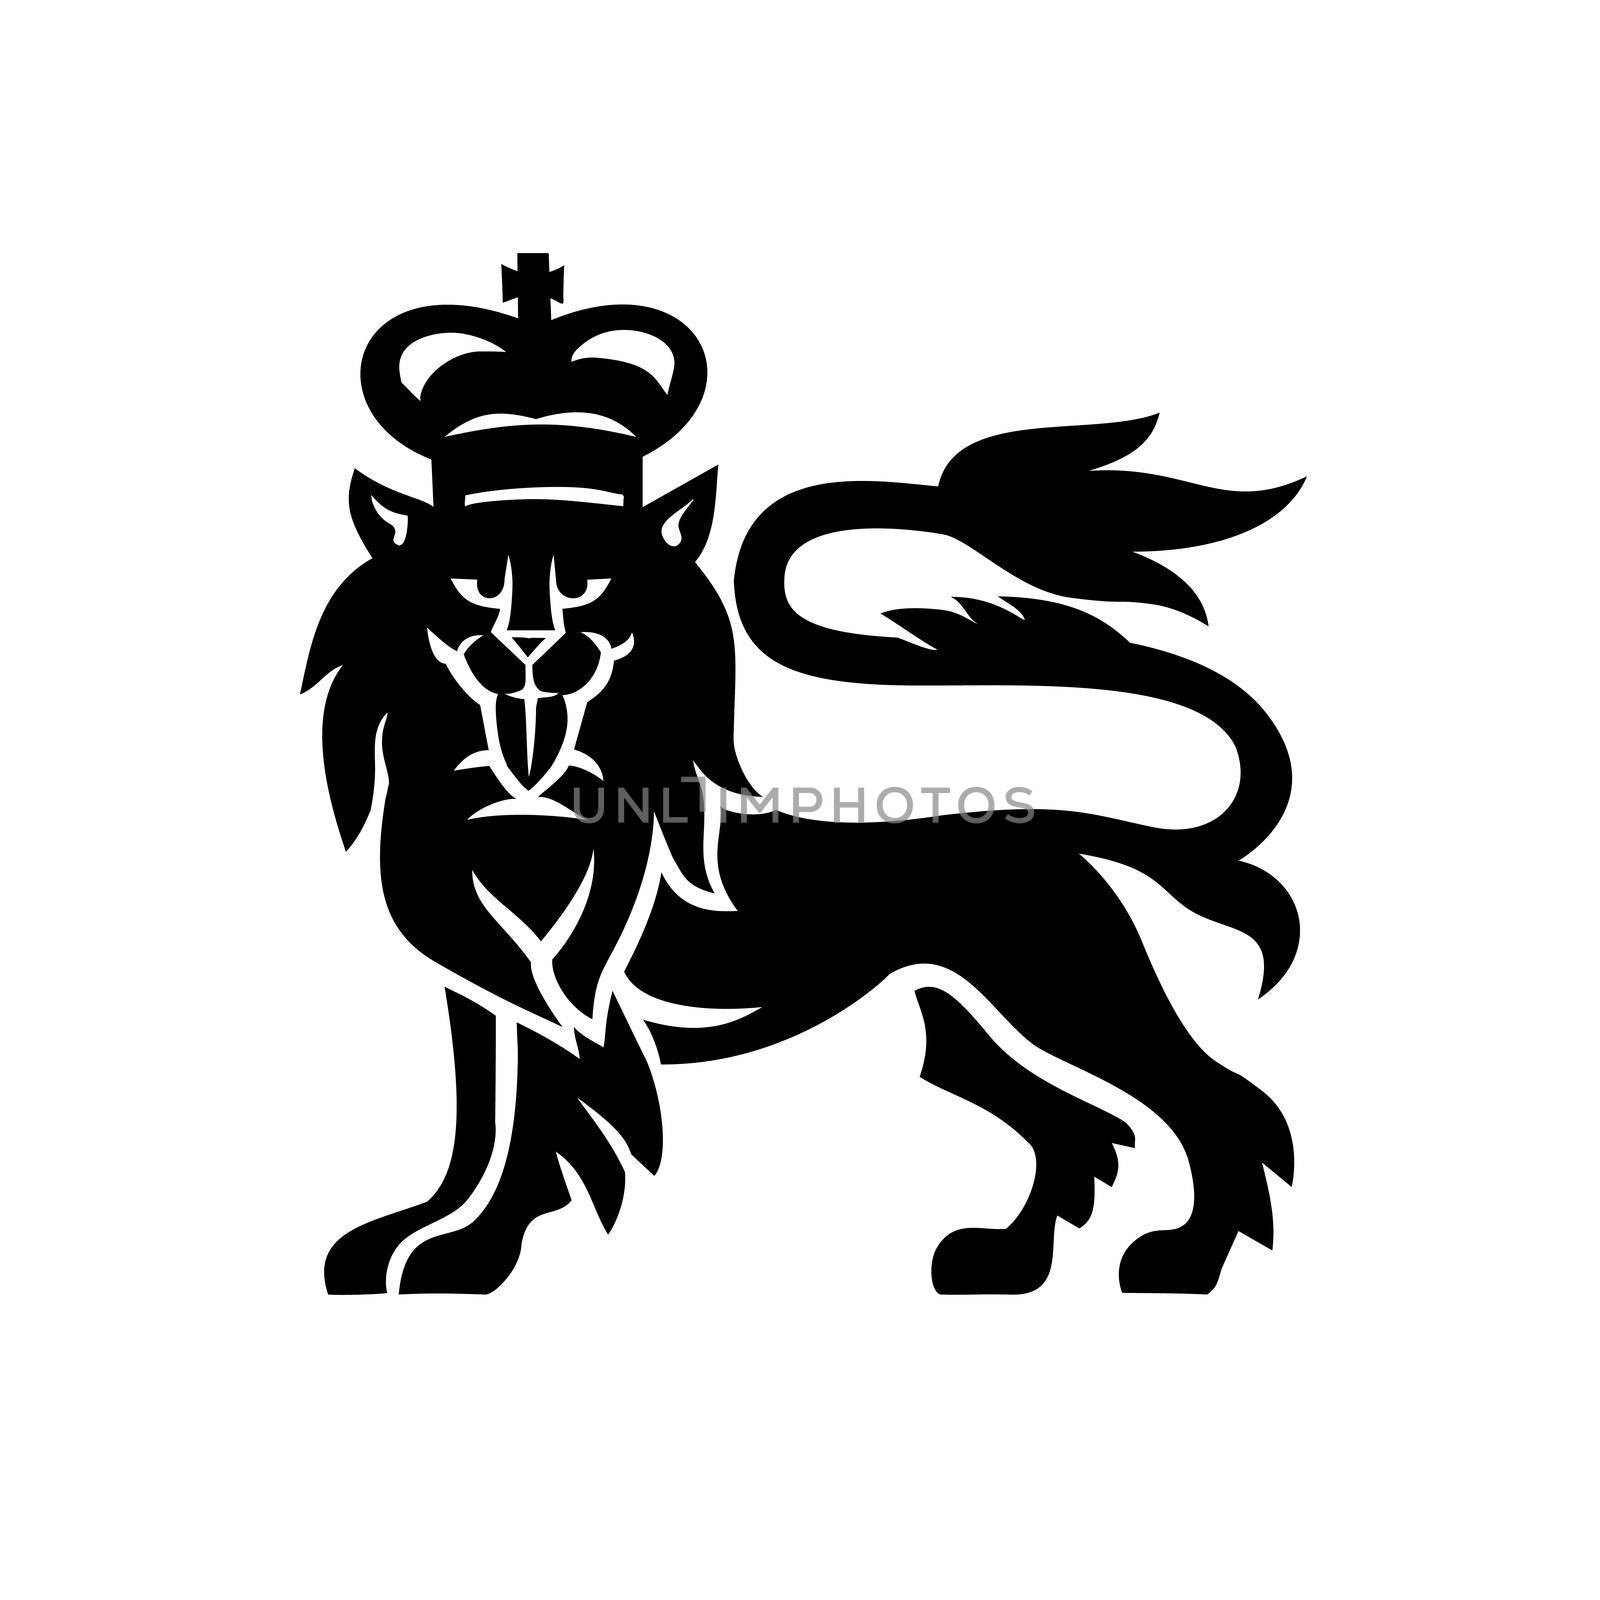 Military badge illustration of English or British lion wearing a royal crown viewed from side looking to front on isolated white background done in black and white retro style. by patrimonio